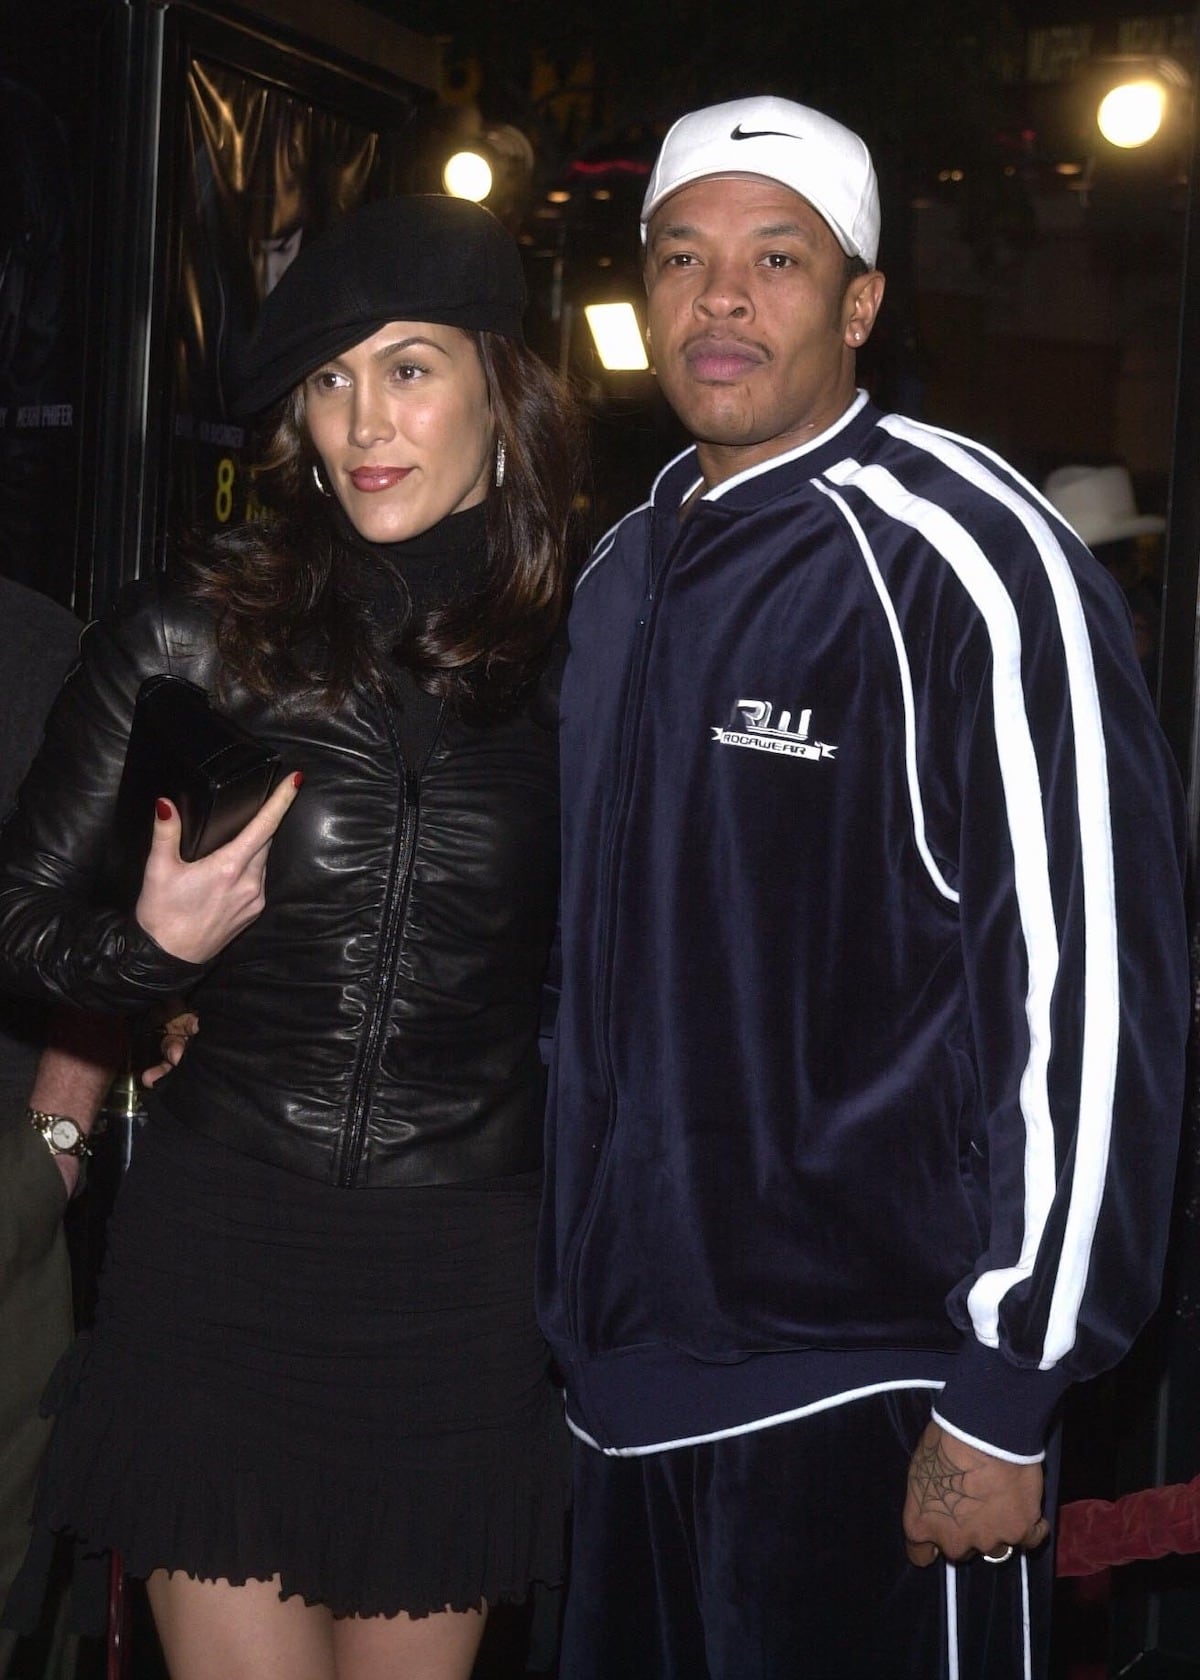 Dr. Dre Pays $100 Million In Divorce Payment To Ex-wife Nicole Plotzker-Young